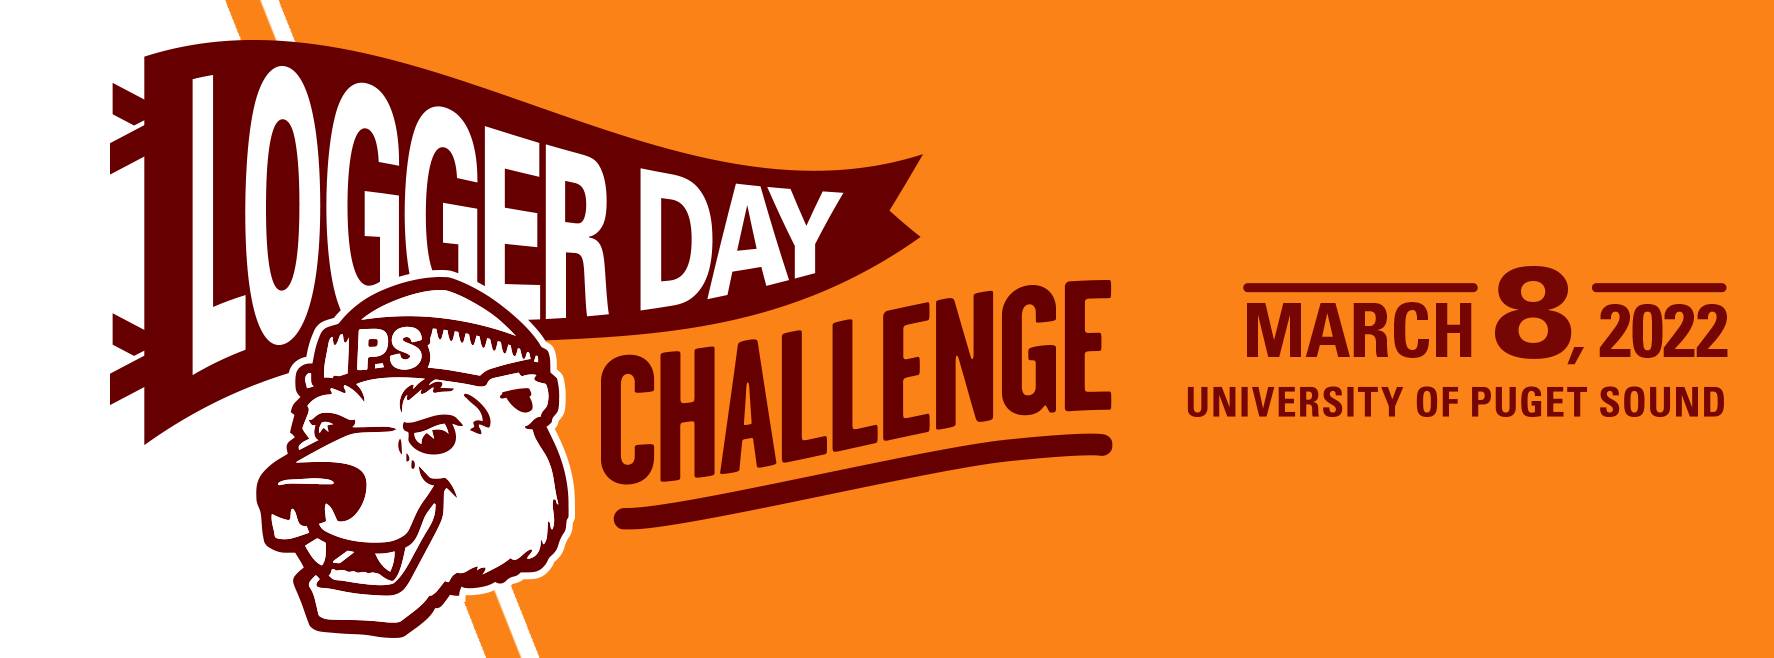 Logger Day Challenge, March 8, 2022, University of Puget Sound